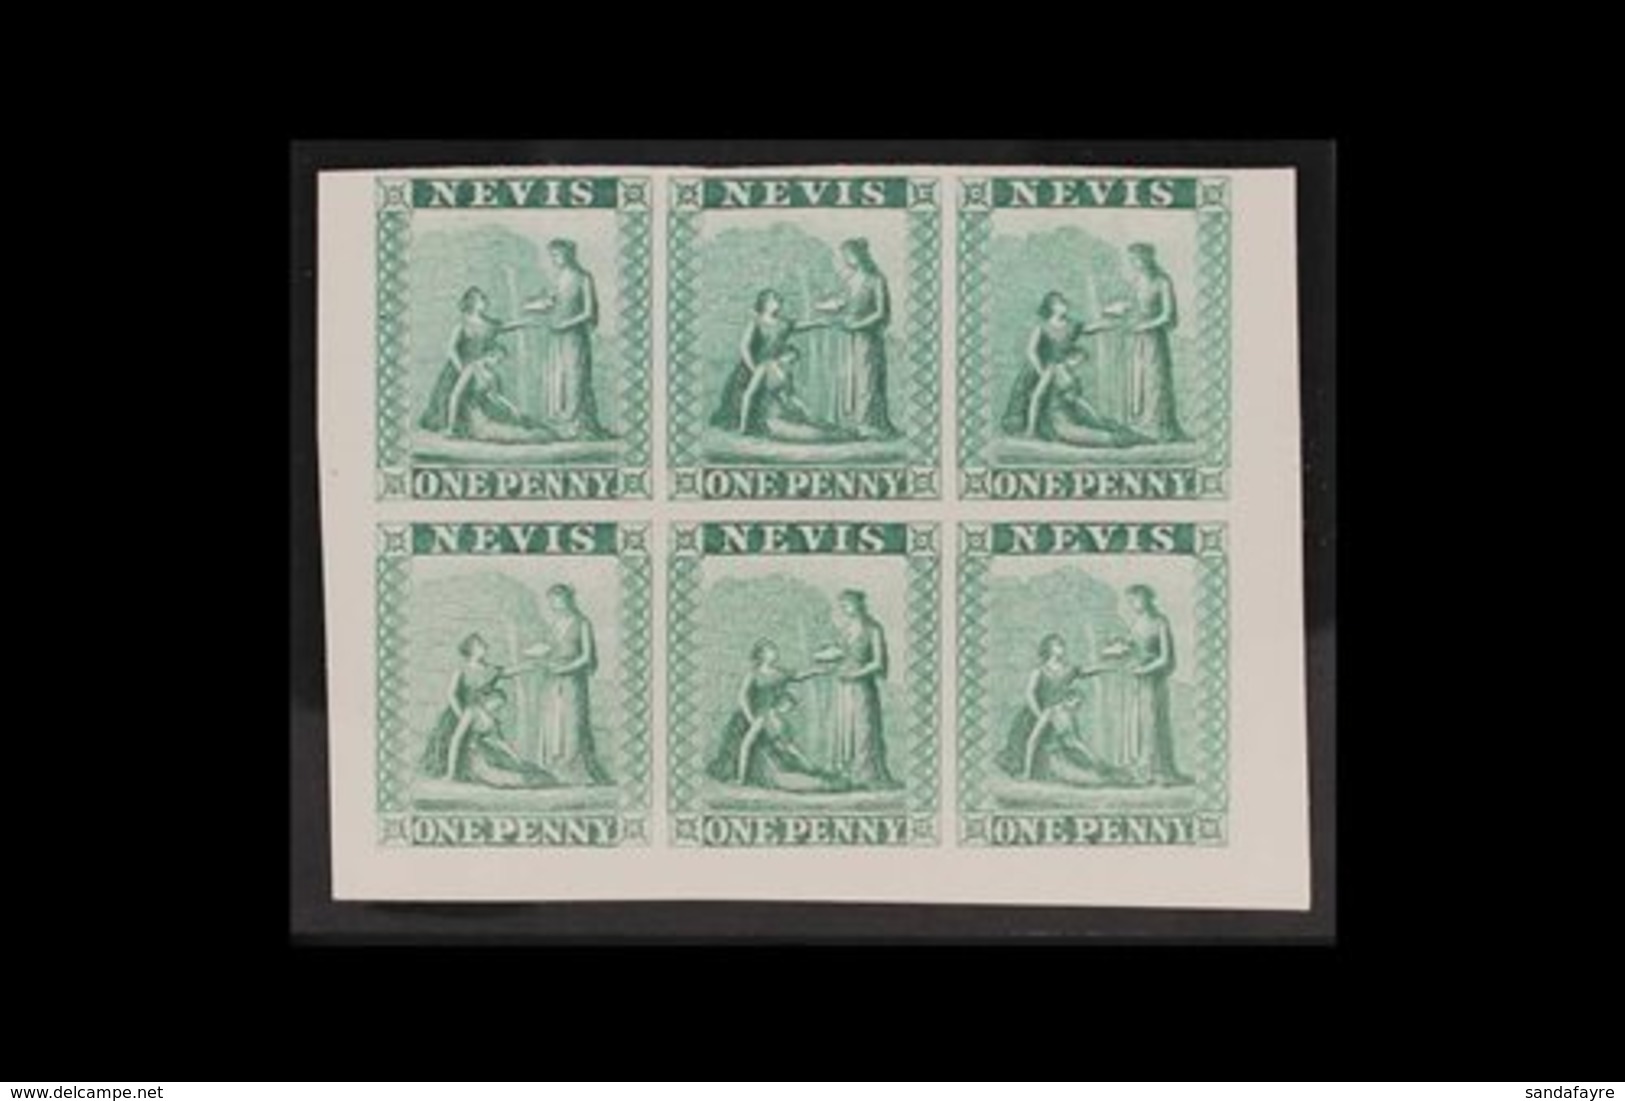 1862 IMPERF PROOFS. 1d Green (as SG 1) IMPERF COLOUR PROOFS BLOCK Of 6 (positions 7 To 12) Printed In Unissued Colour On - San Cristóbal Y Nieves - Anguilla (...-1980)